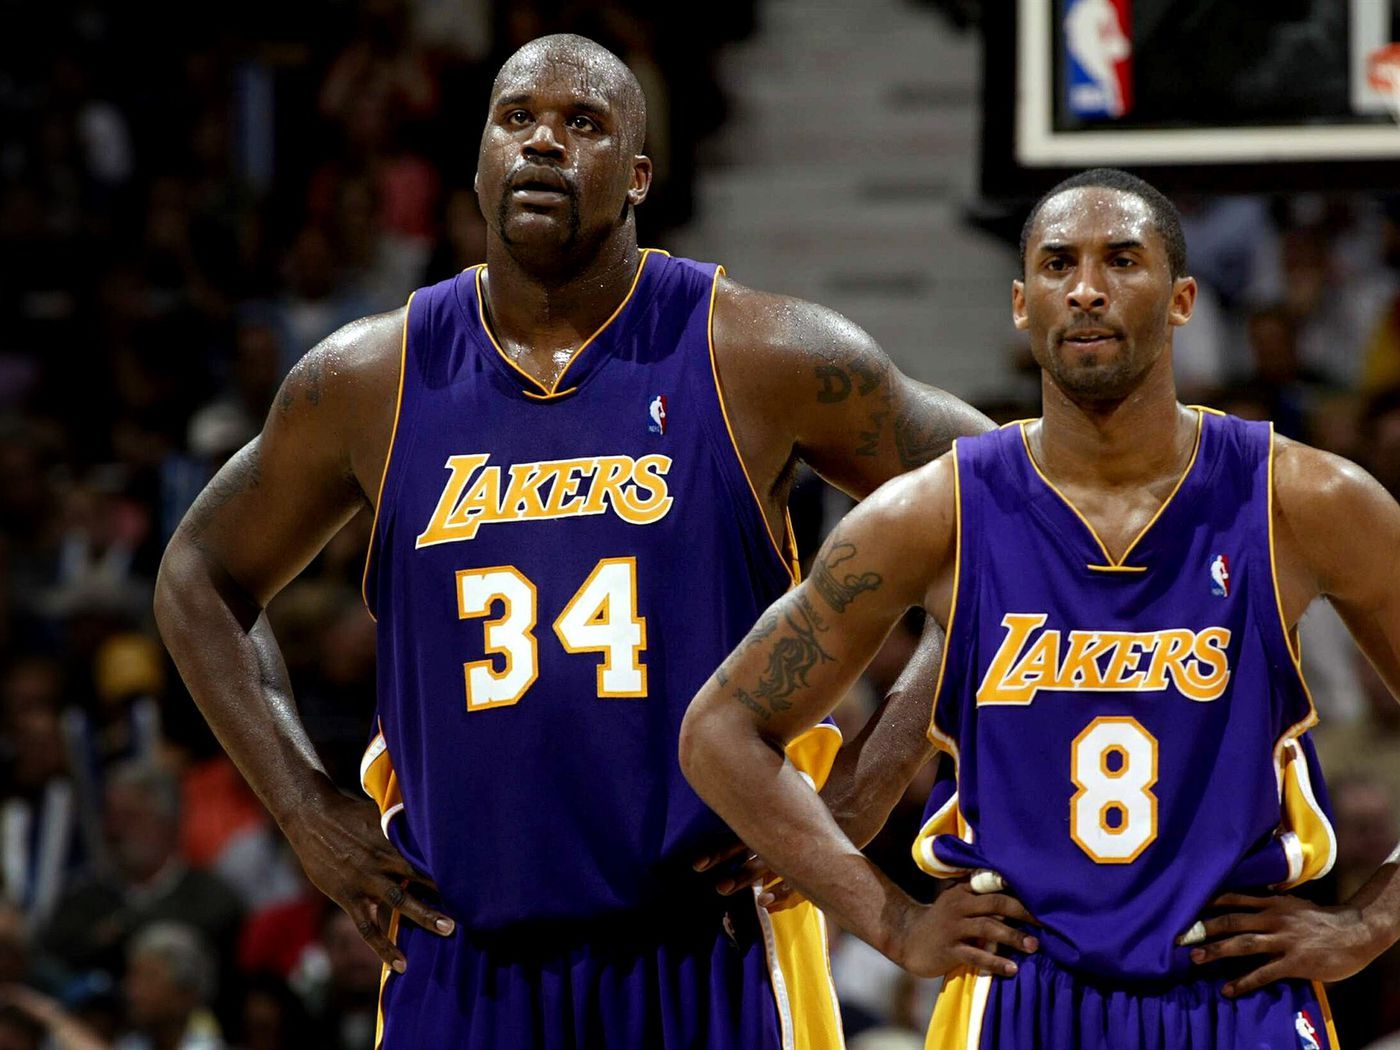 Shaquille O'Neal, LeBron James and more celebrate Kobe Bryant's 42nd birthday